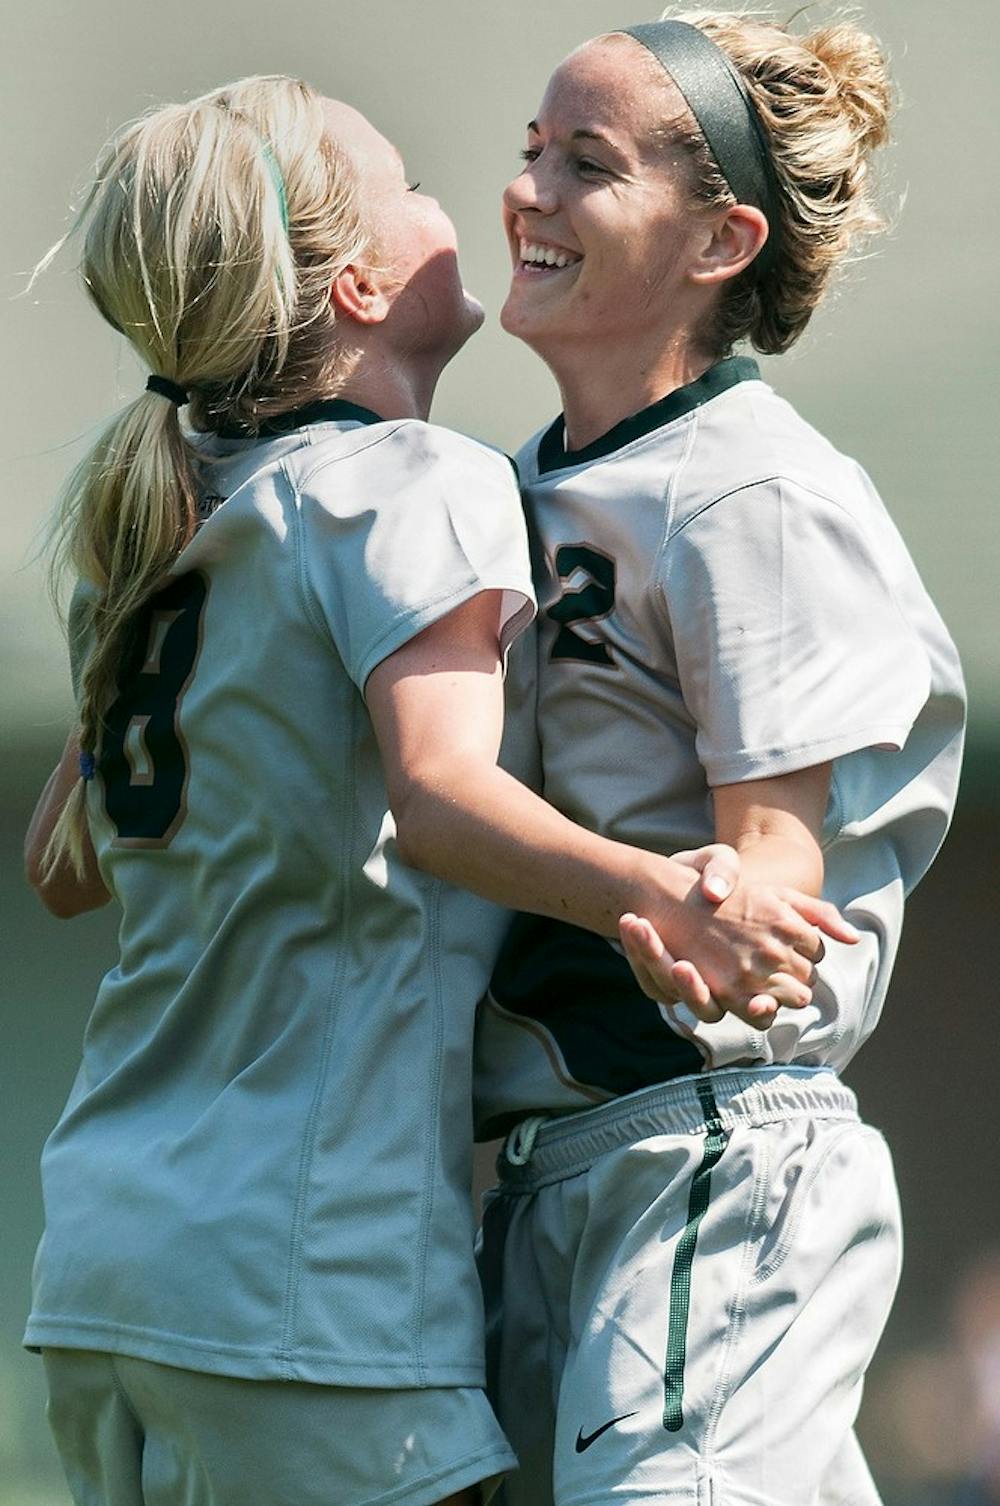 	<p>Redshirt freshman midfielder Jessica White, 8, celebrates with sophomore forward Allyson Krause, 2, after a goal is scored during the game against Milwaukee, Aug. 25, 2013, at DeMartin Soccer Stadium. The Spartans defeated Milwaukee, 5-2. Danyelle Morrow/The State News</p>